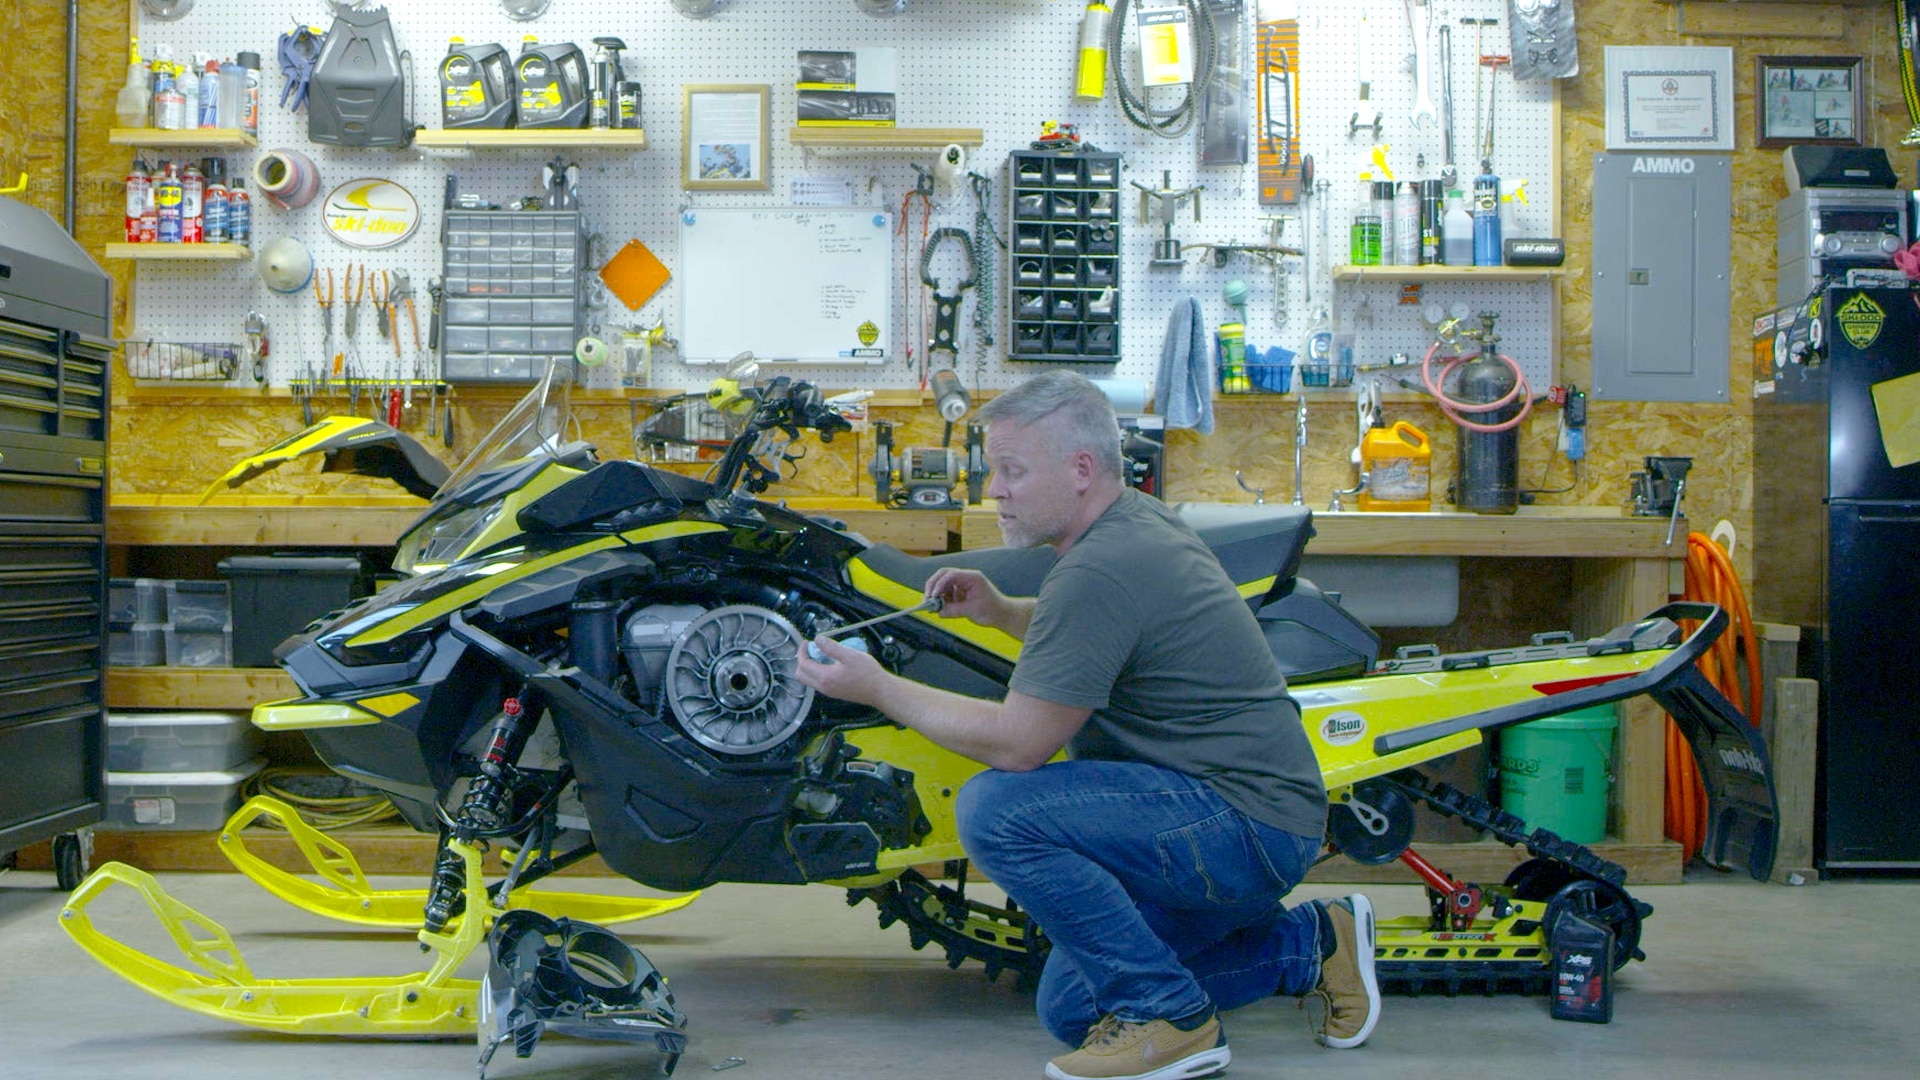 HOW TO DO IN-SEASON MAINTENANCE FOR YOUR TRAIL SLED?